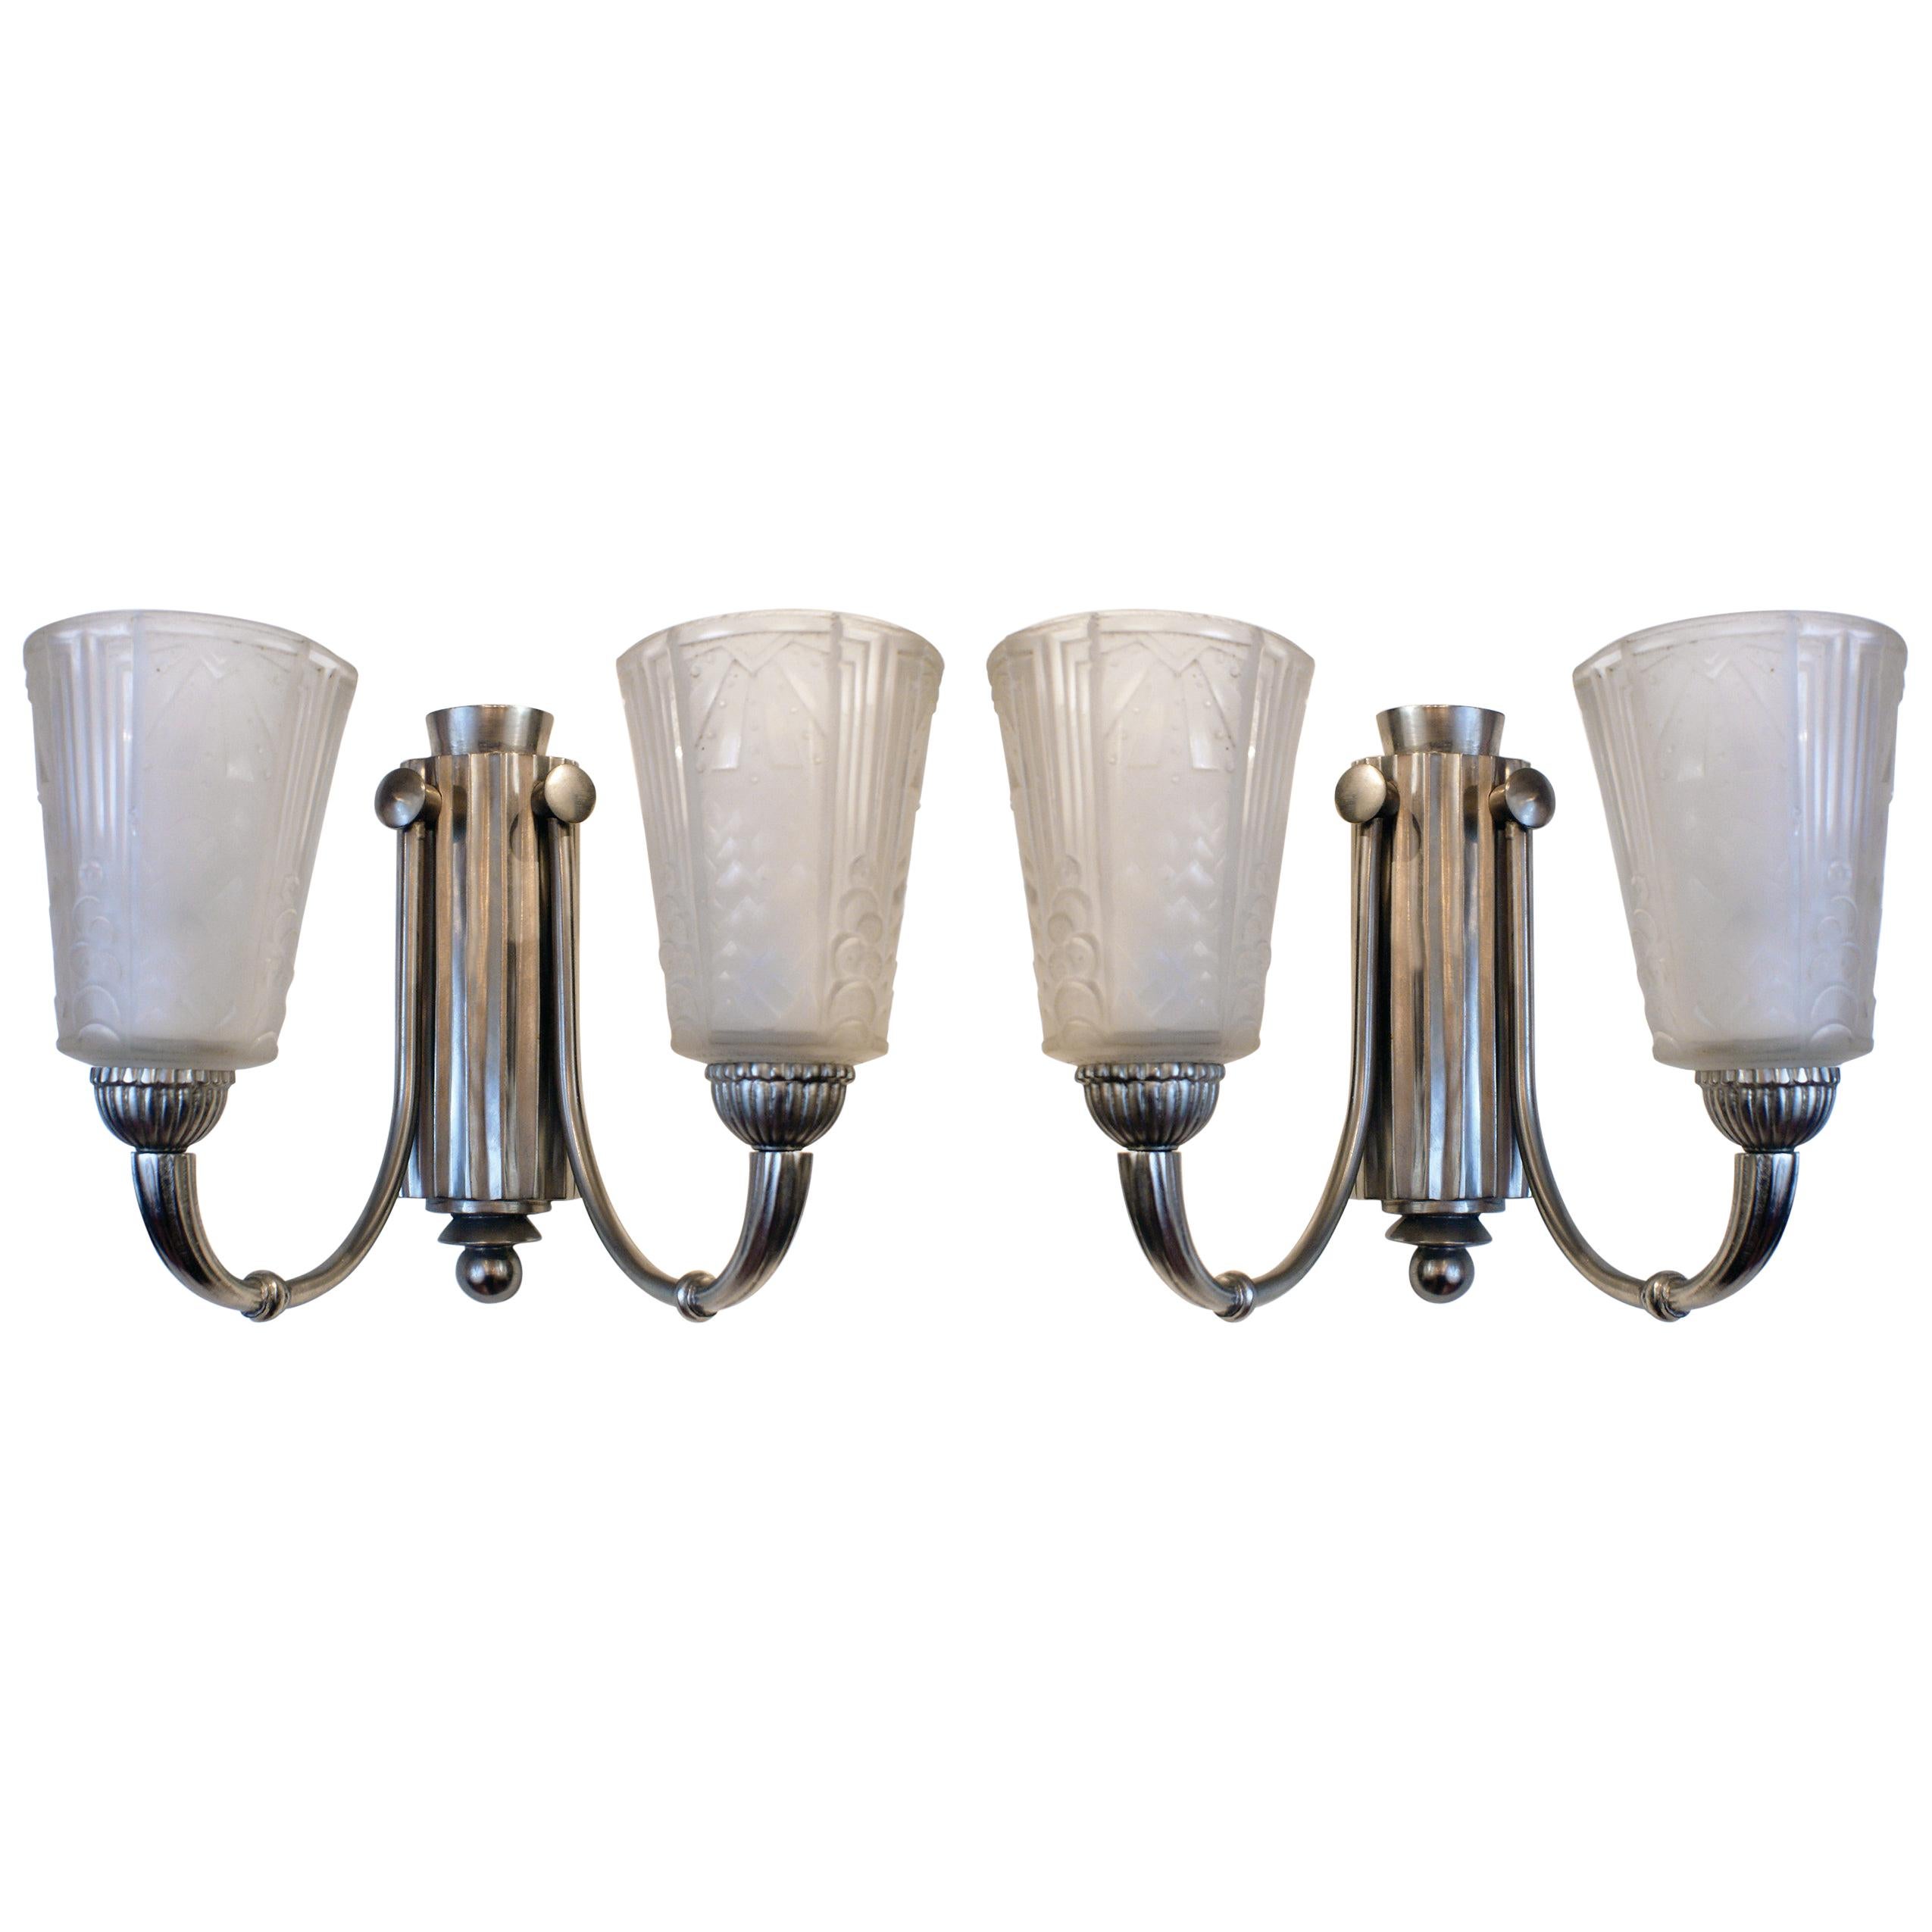 Stunning Pair of Art Deco Wall Sconces Signed "Muller Freres Luneville" For Sale